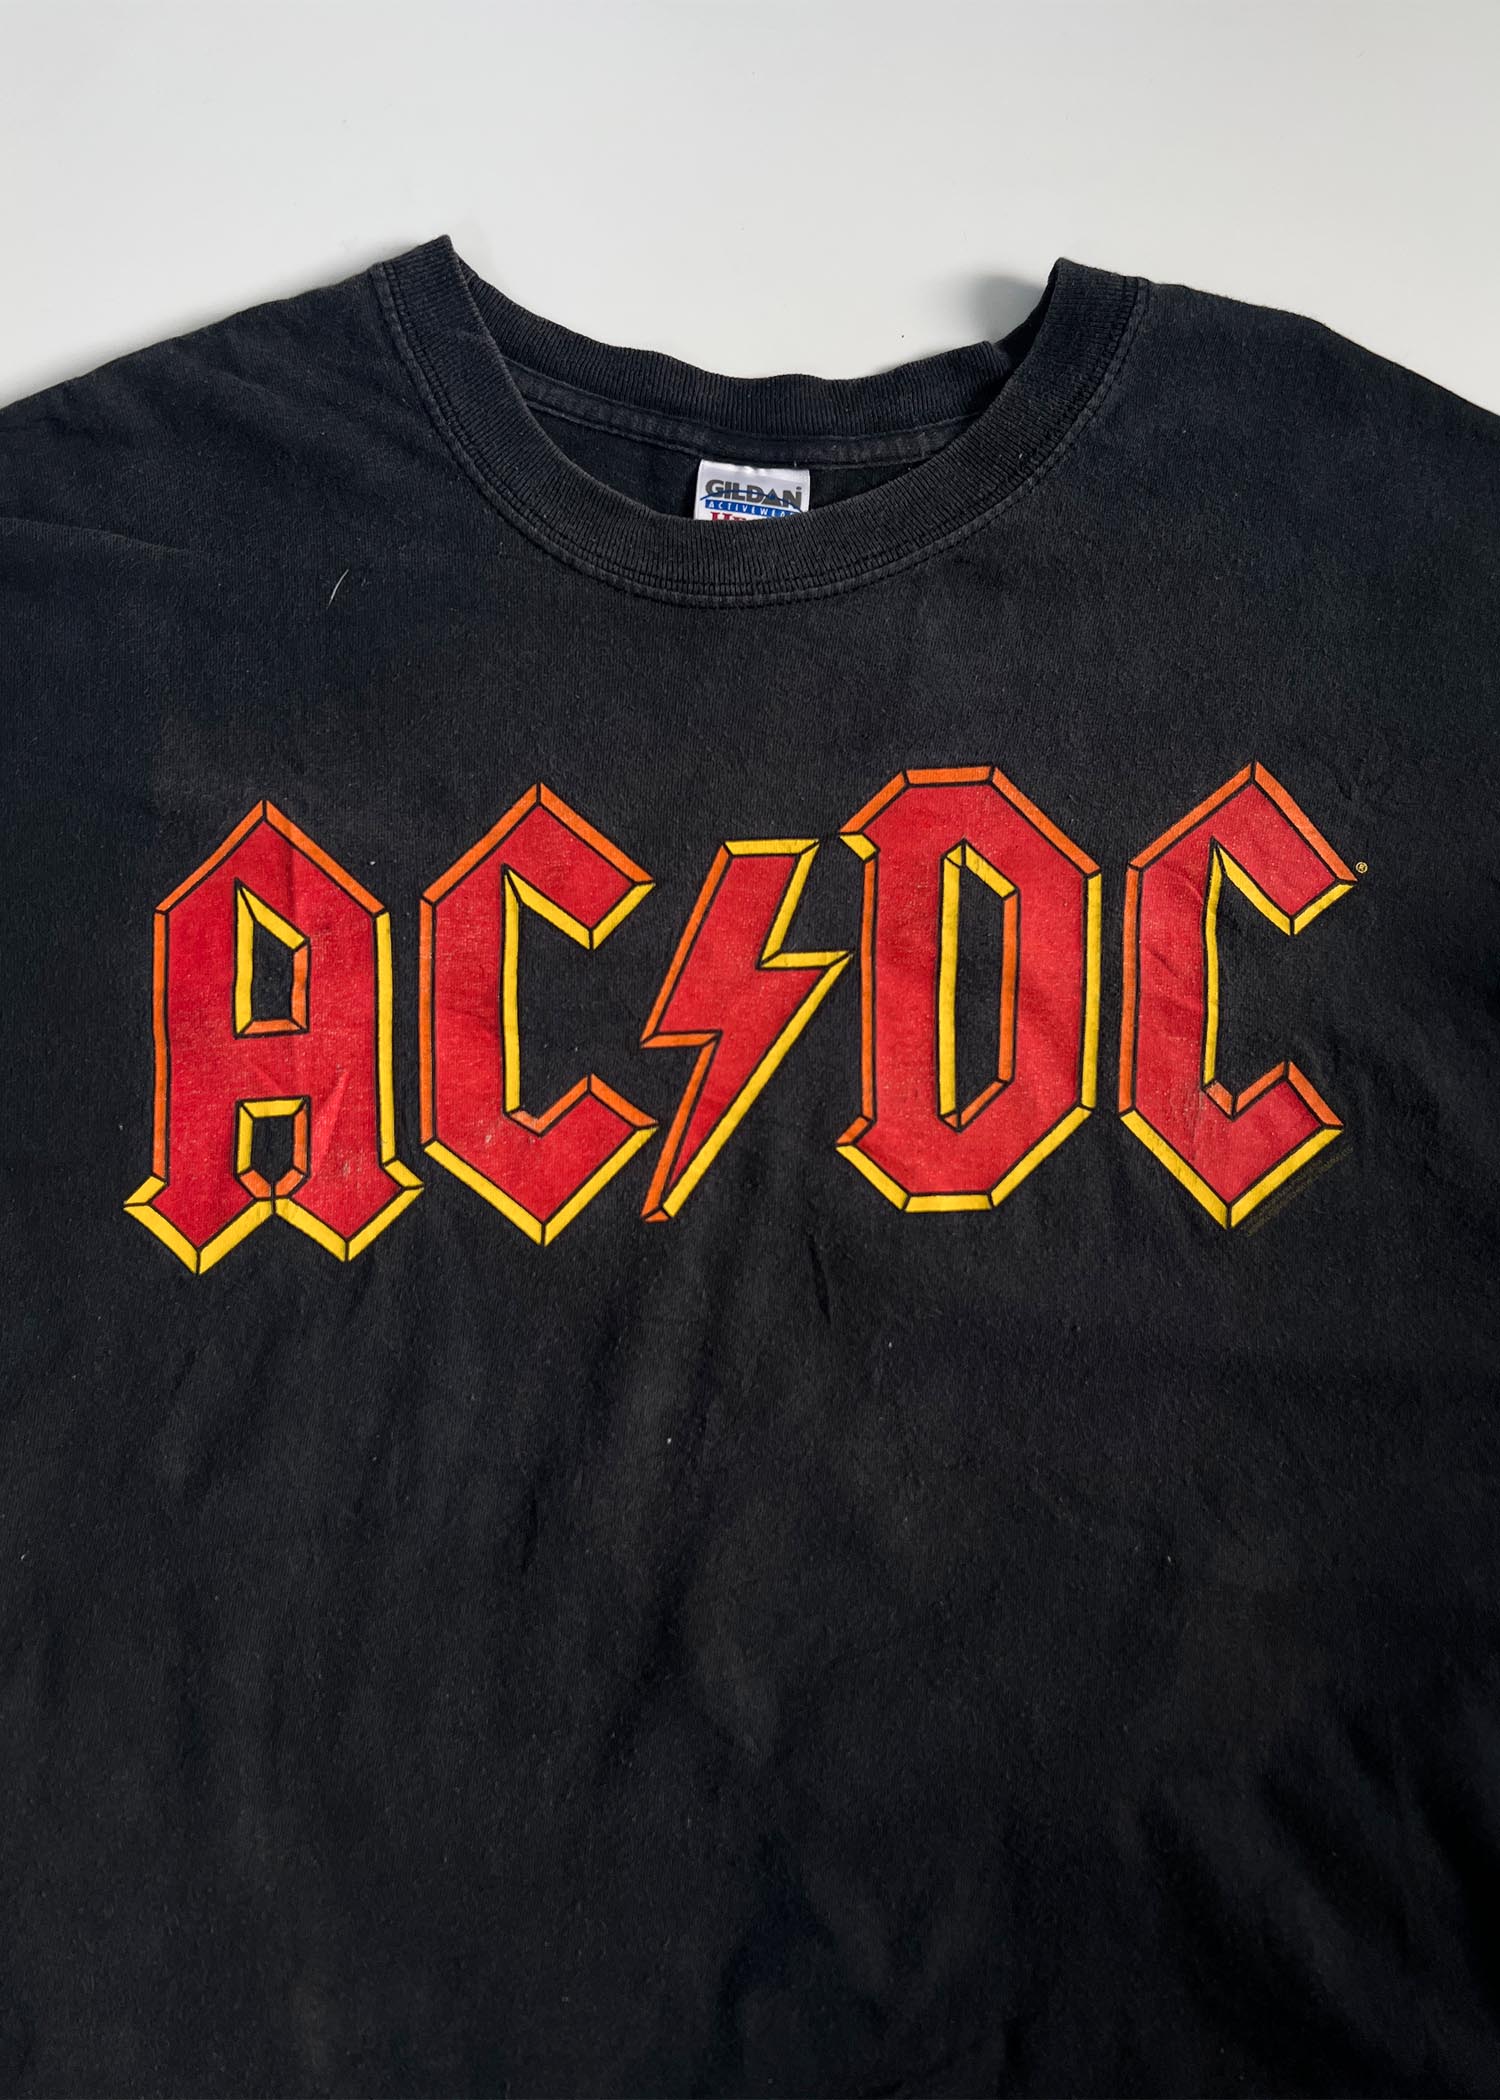 00s ACDC vintage rock t-shirts